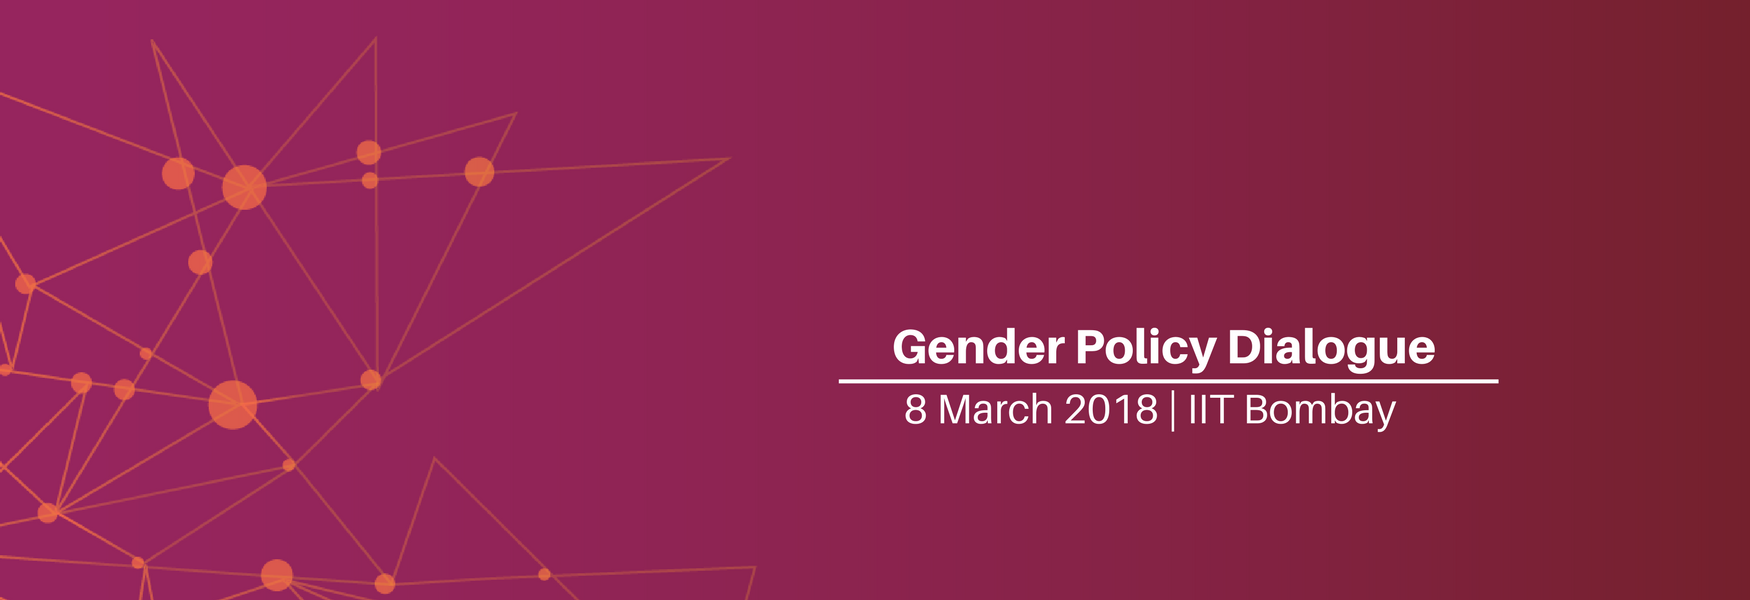 gender-policy-dialogue